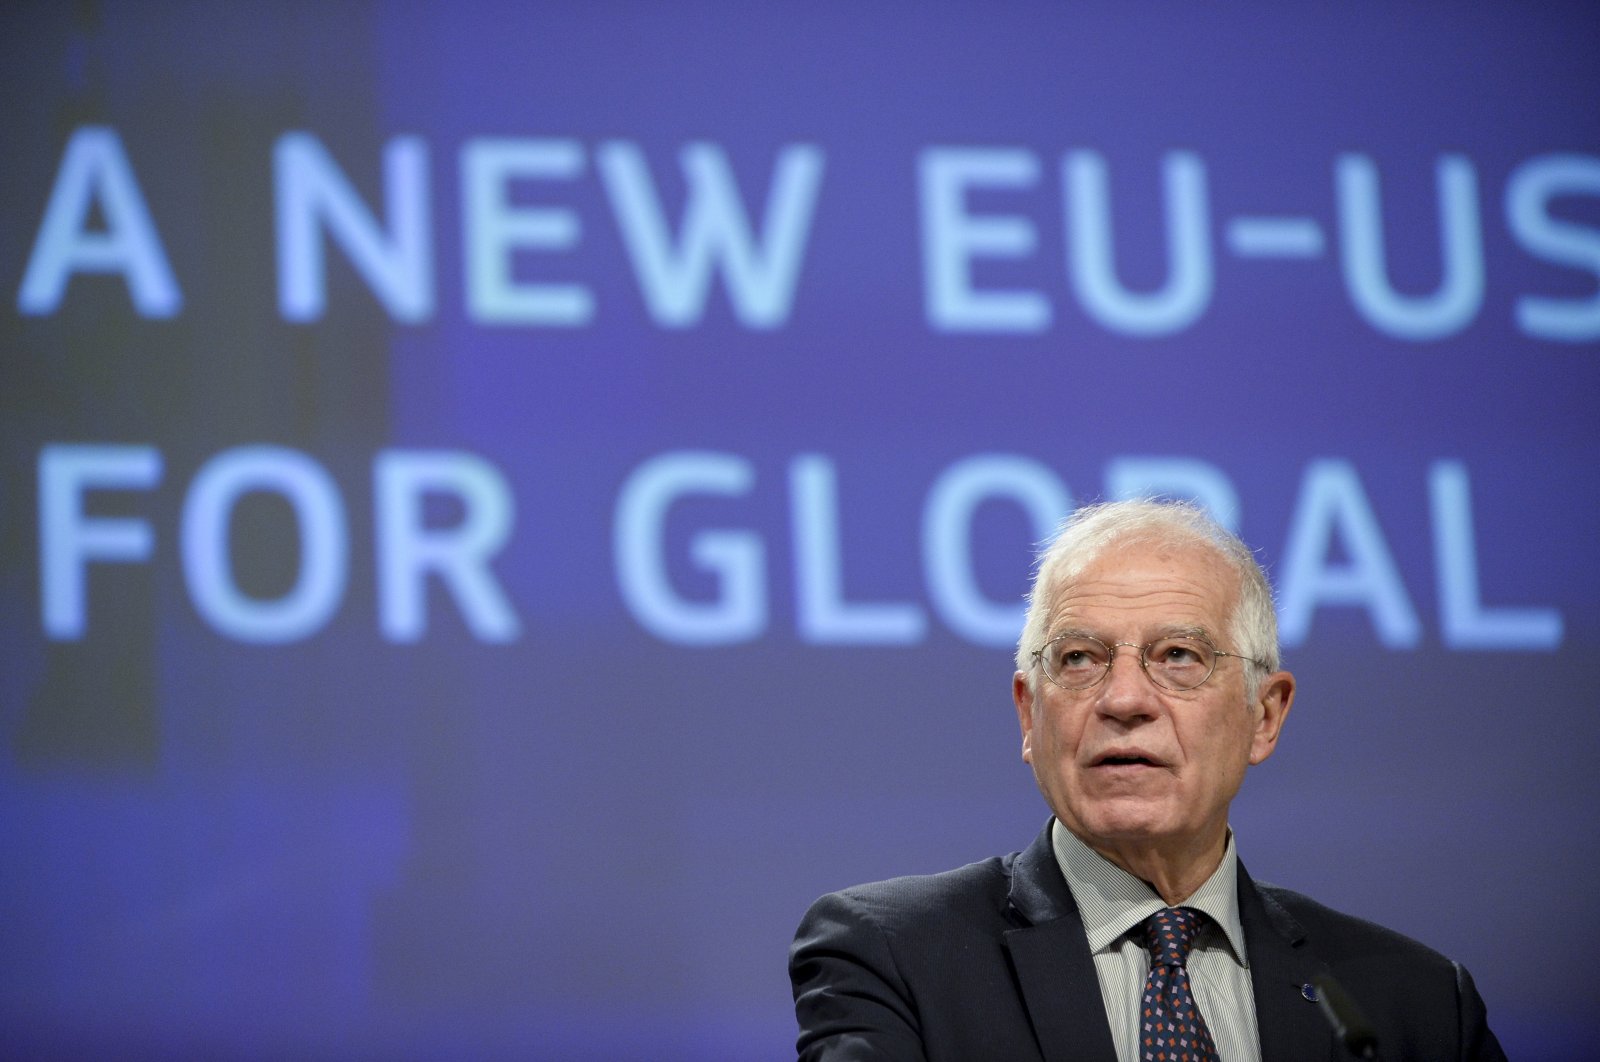 European Union foreign policy chief Josep Borrell speaks during a media conference at EU headquarters in Brussels, Dec. 2, 2020. (AP File Photo)